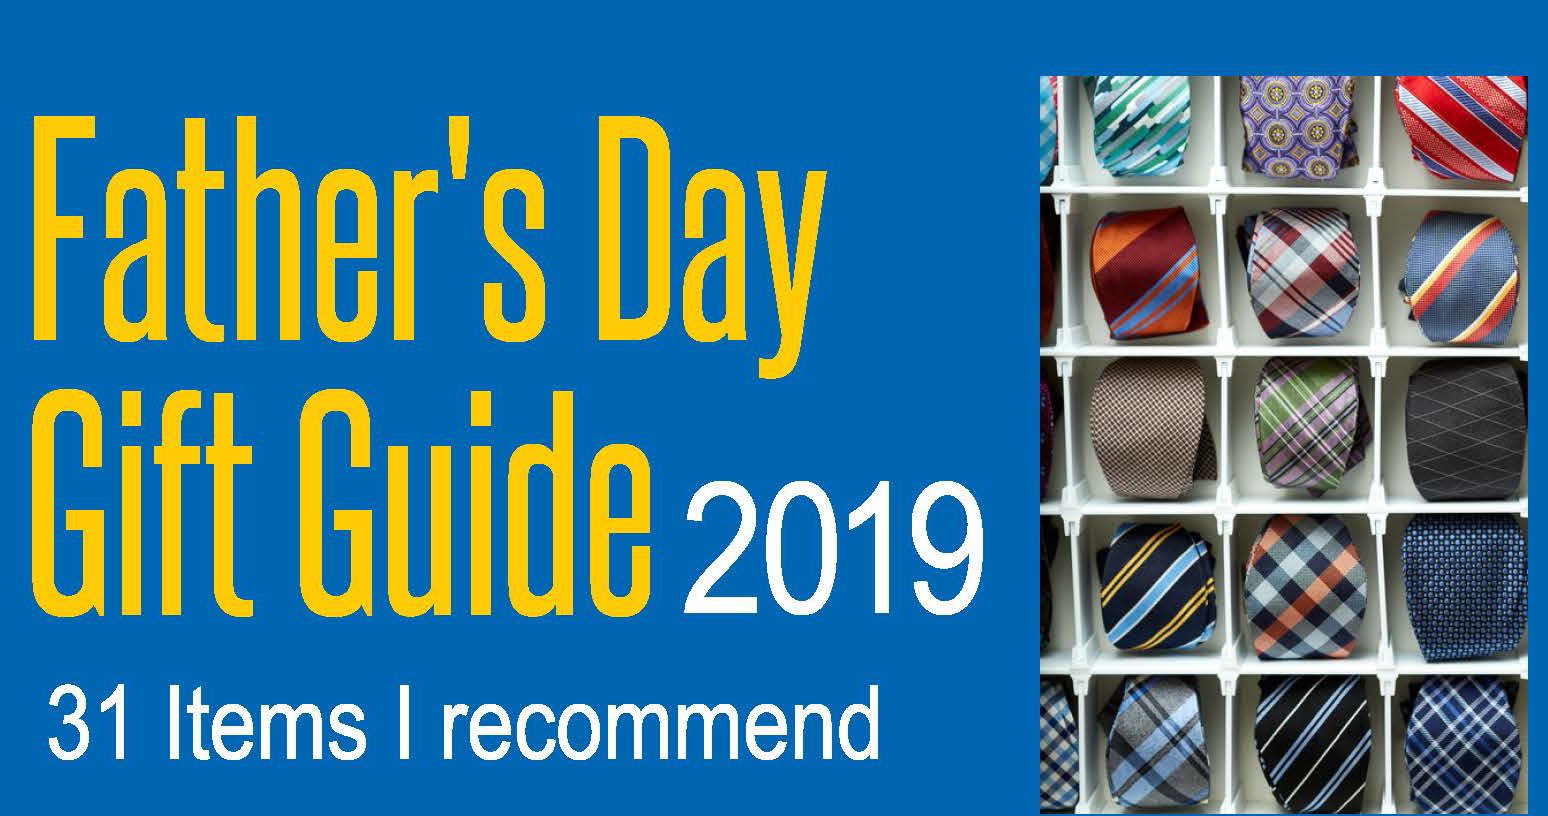 Father's Day Gift Guide 2019 Hotspots! Magazine